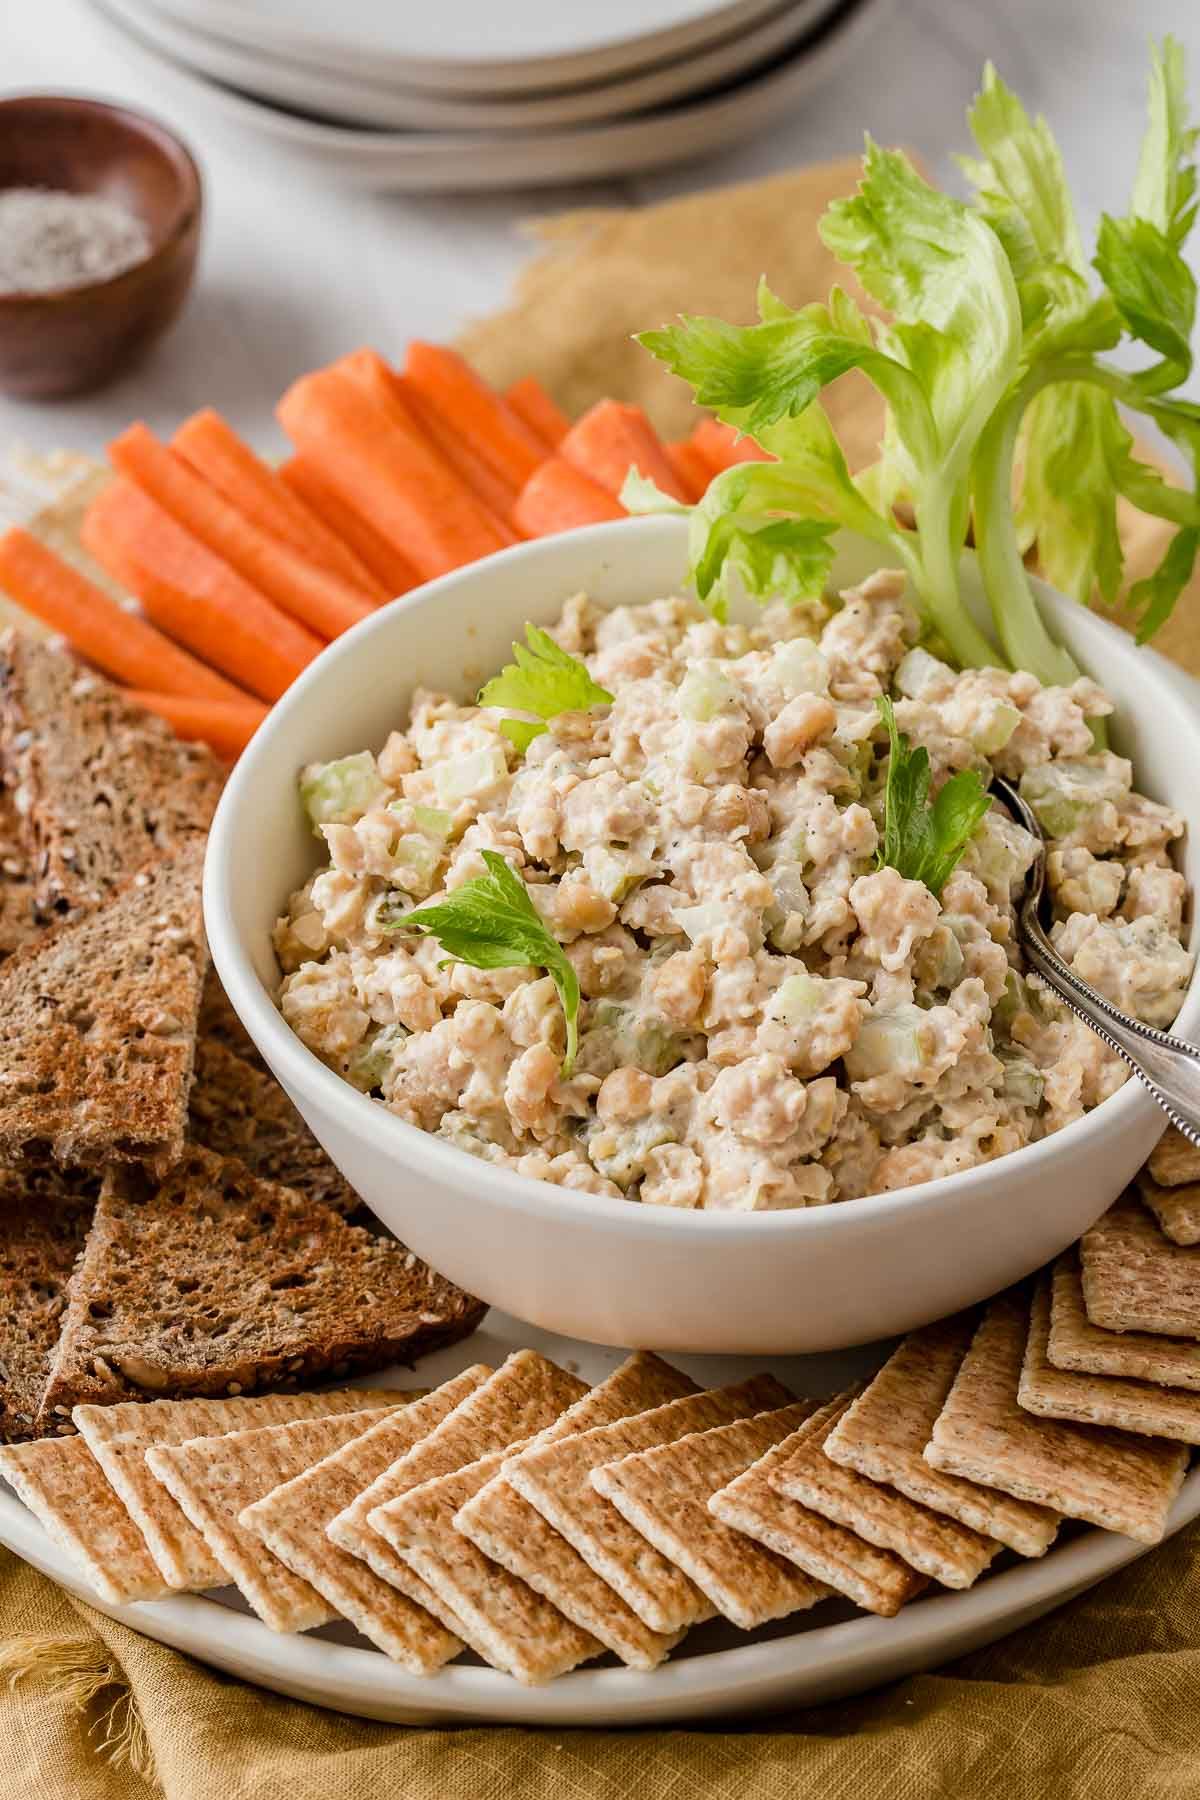 Tasty chickpea tuna salad in a white bowl with crackers and veggies on a tray.